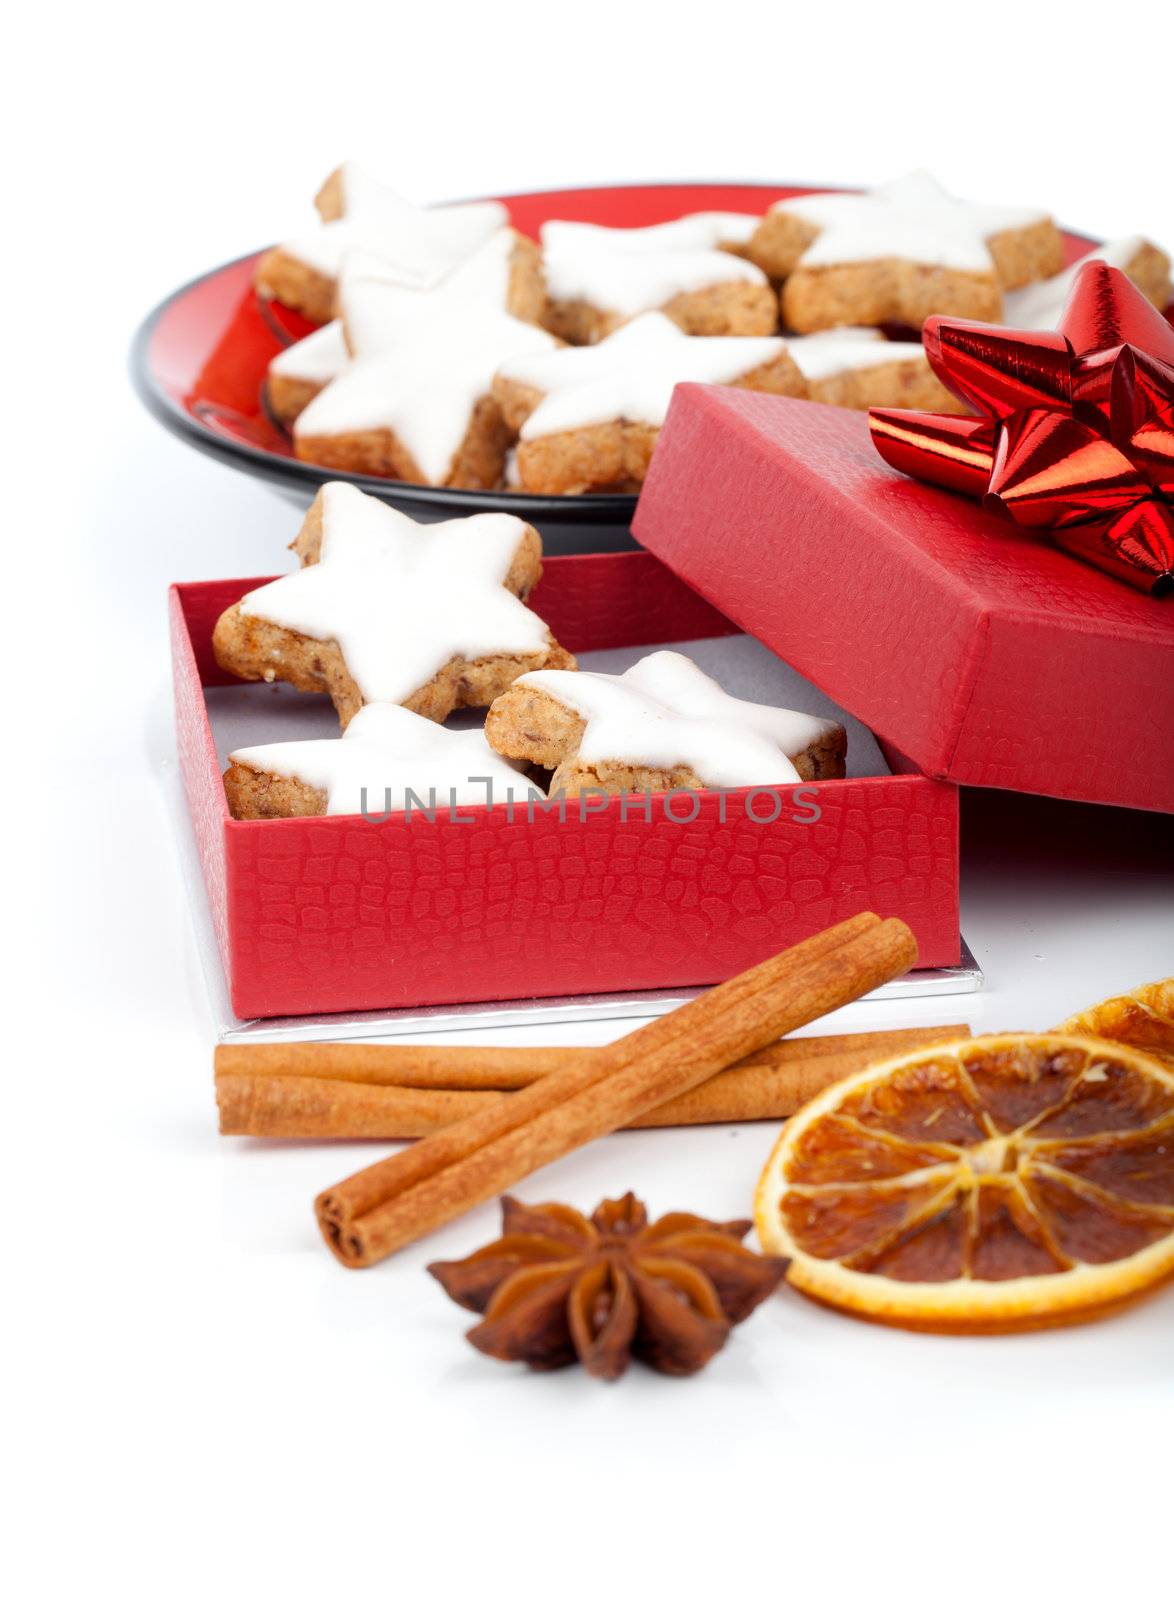 star shaped cinnamon biscuit in red box with Anise, cinnamon and by motorolka